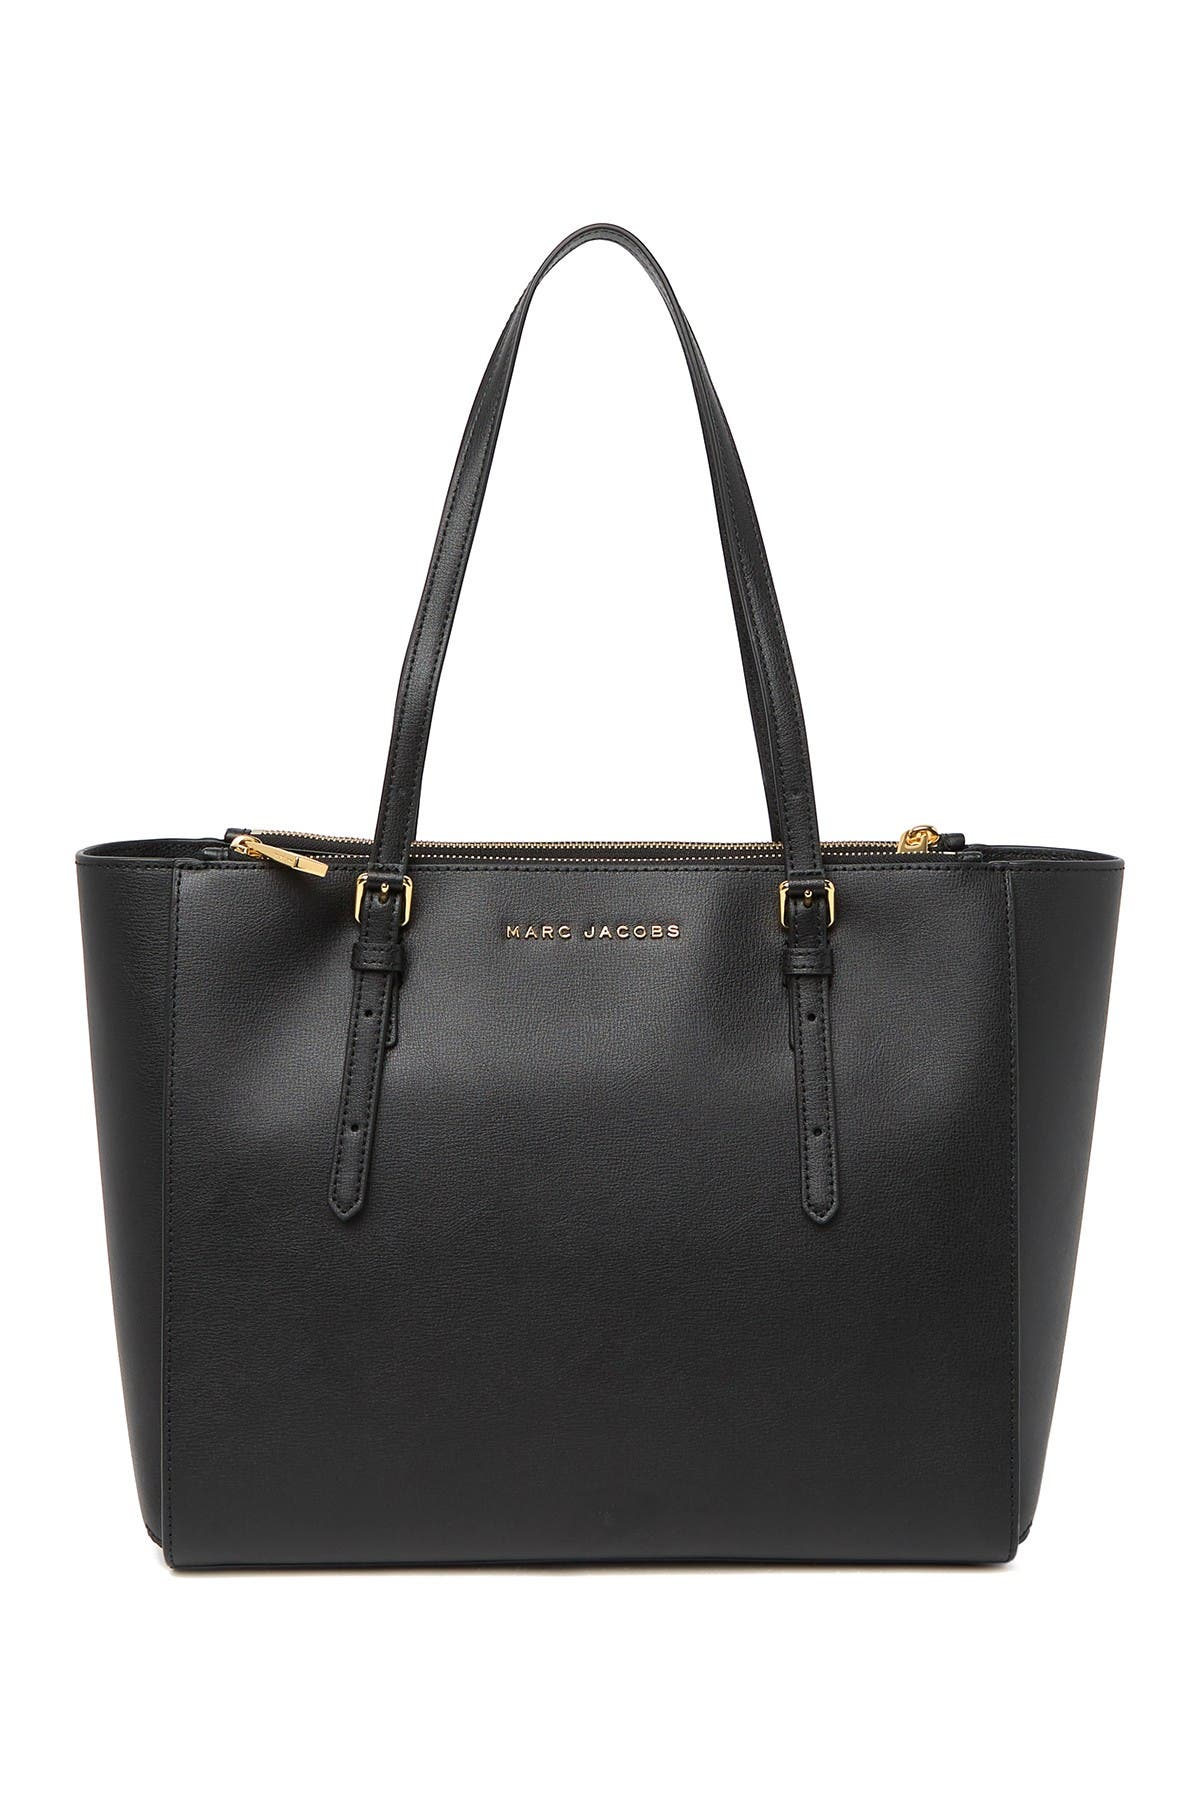 Marc Jacobs + Commuter Leather Tote Bag